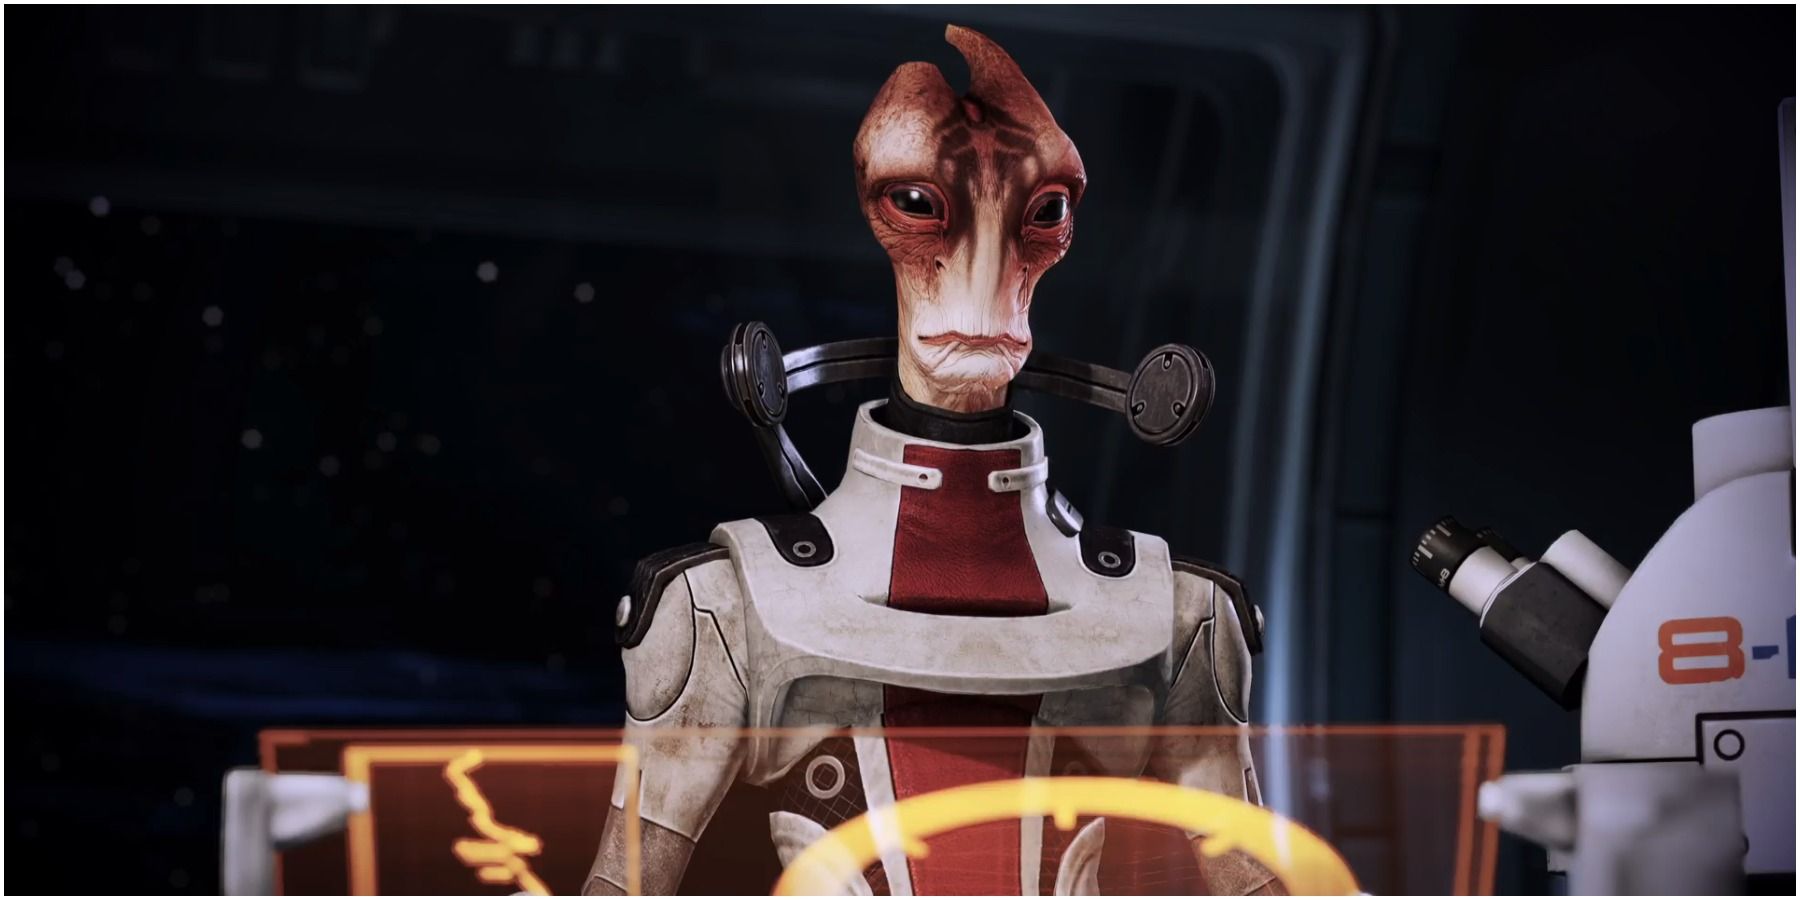 Mordin Solus from Mass Effect